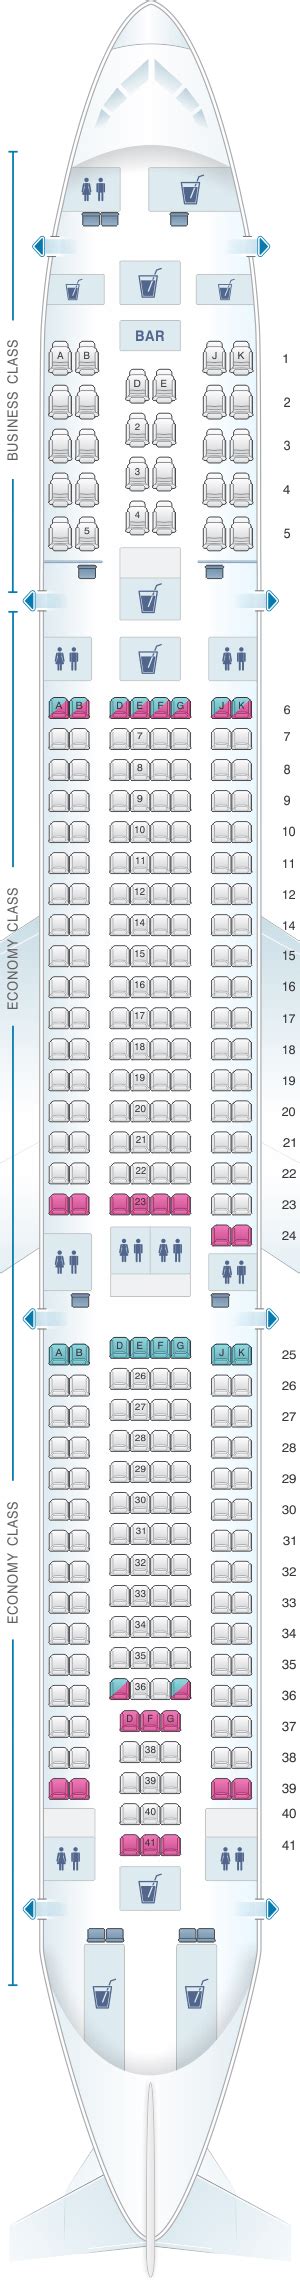 Turkish Airline Seat Selection